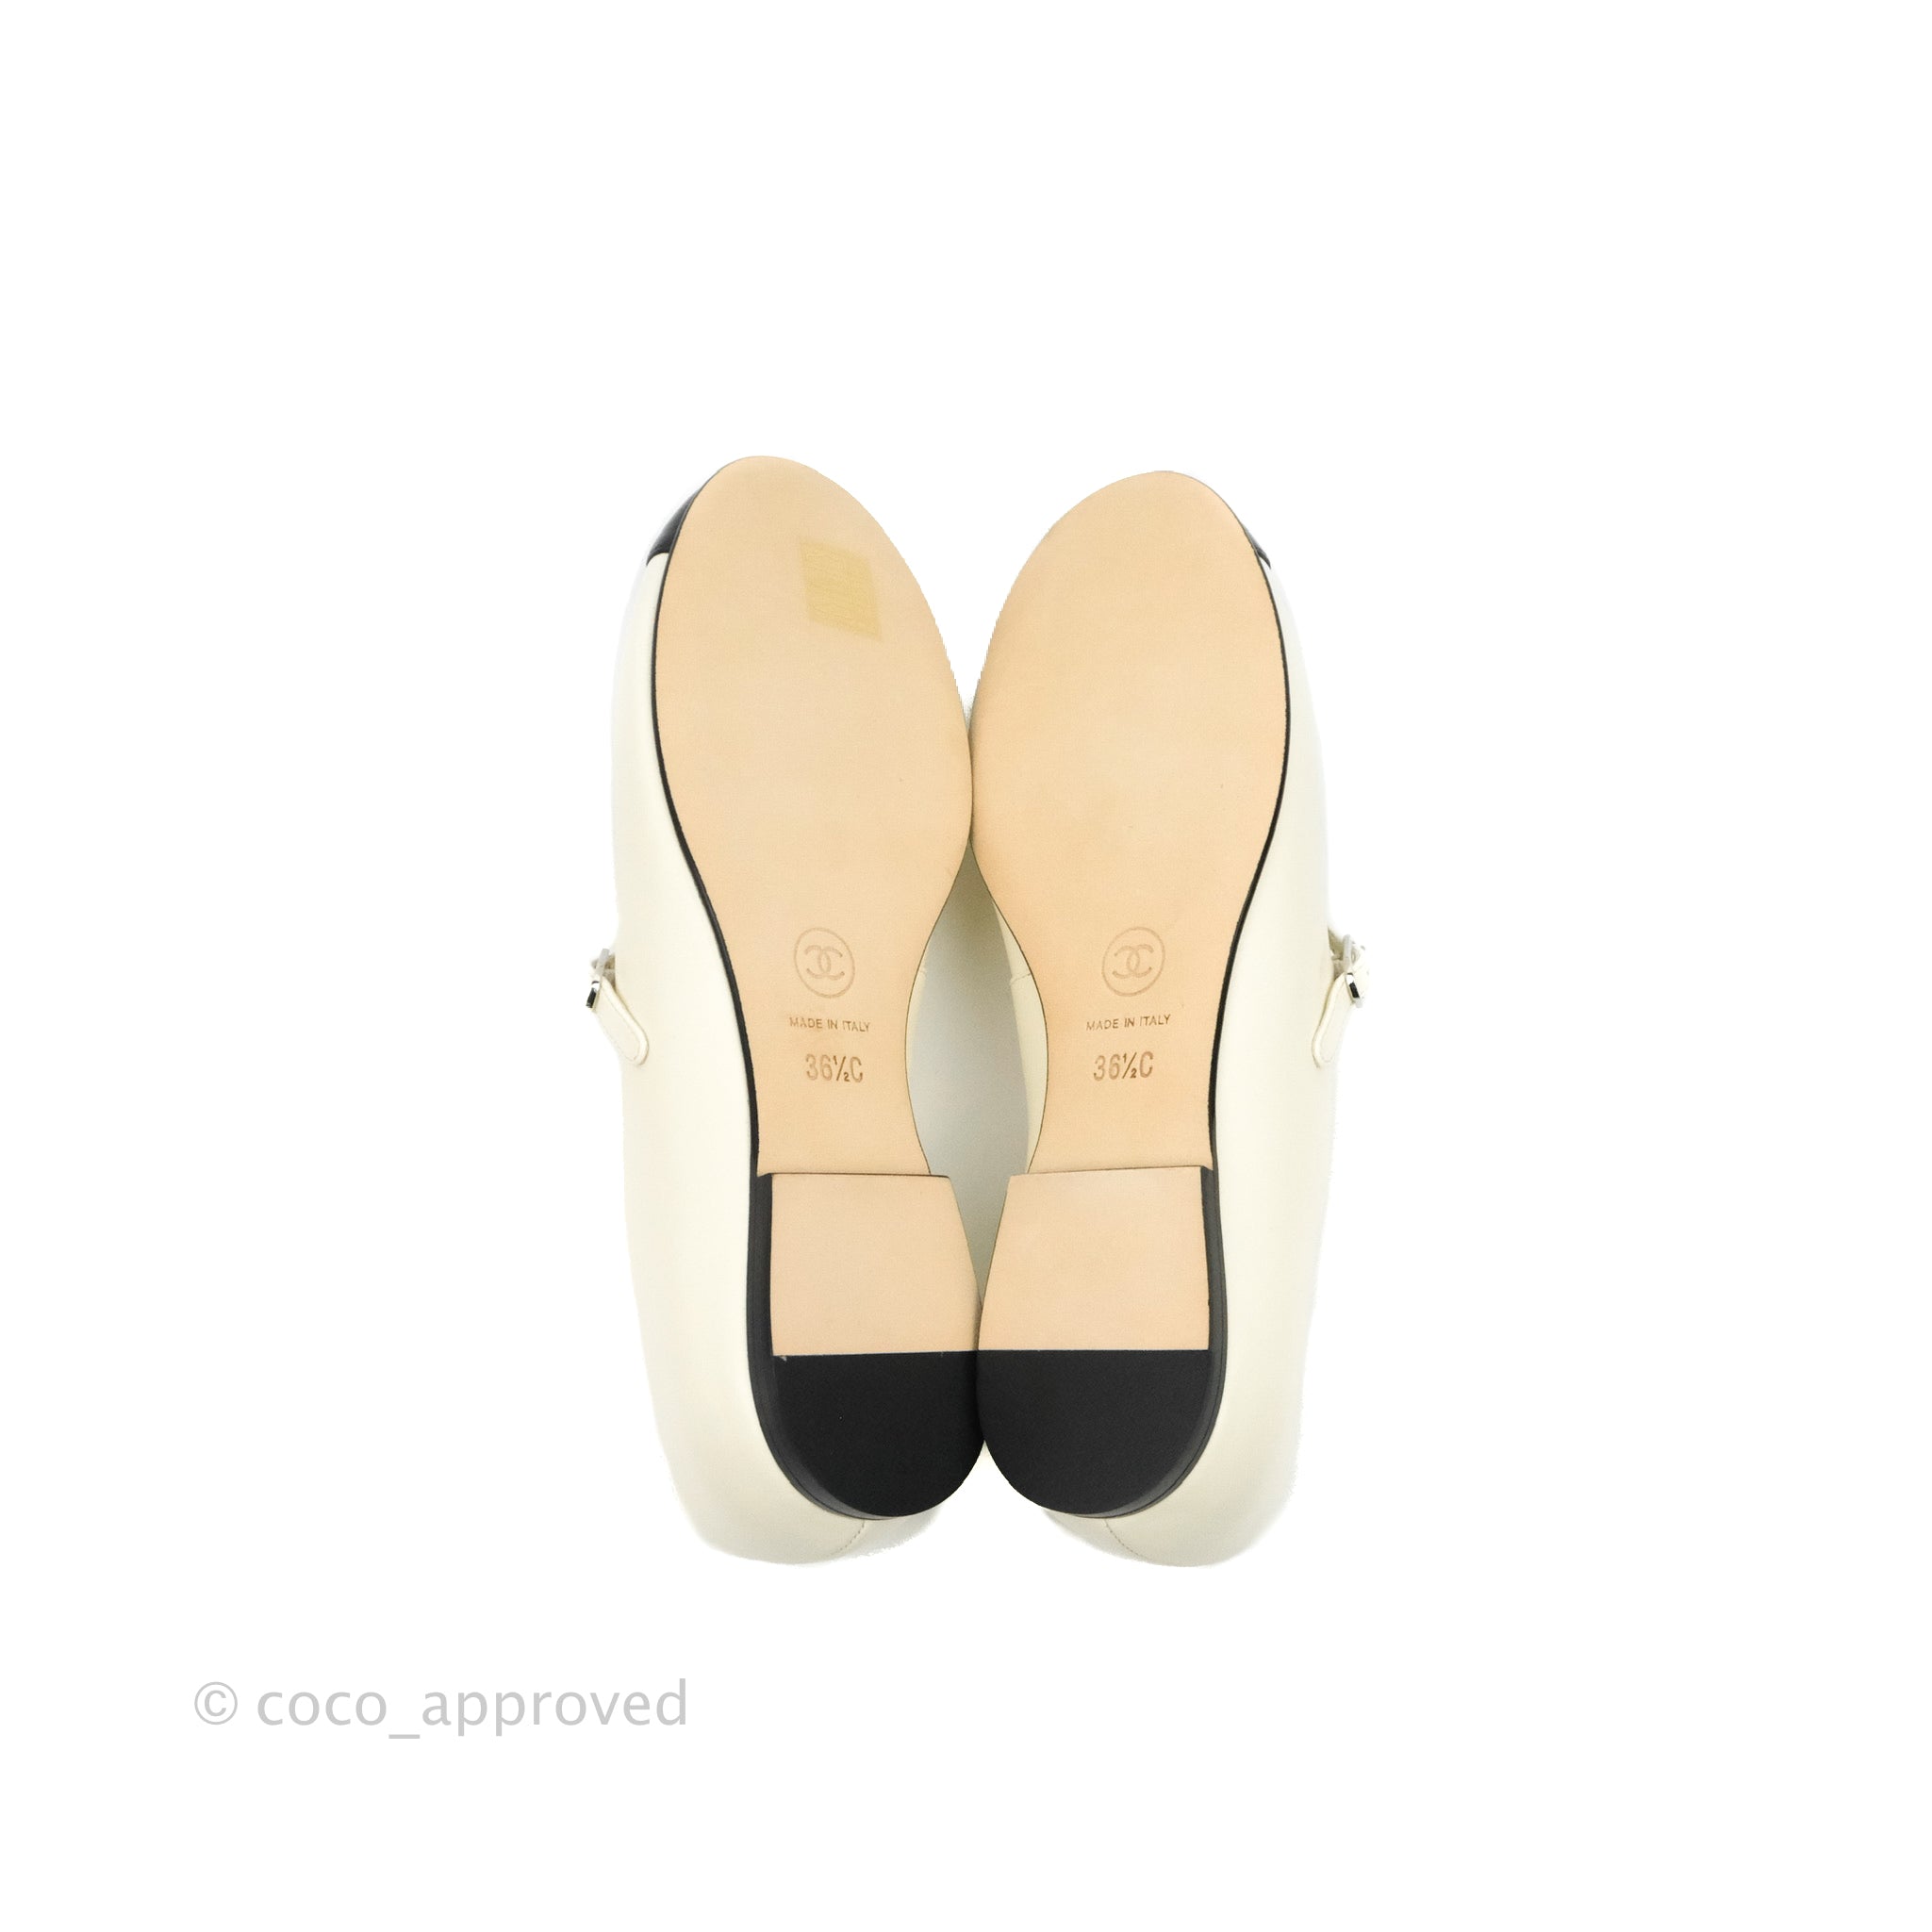 Chanel Mary Janes Flats White/Black 36.5 – Coco Approved Studio